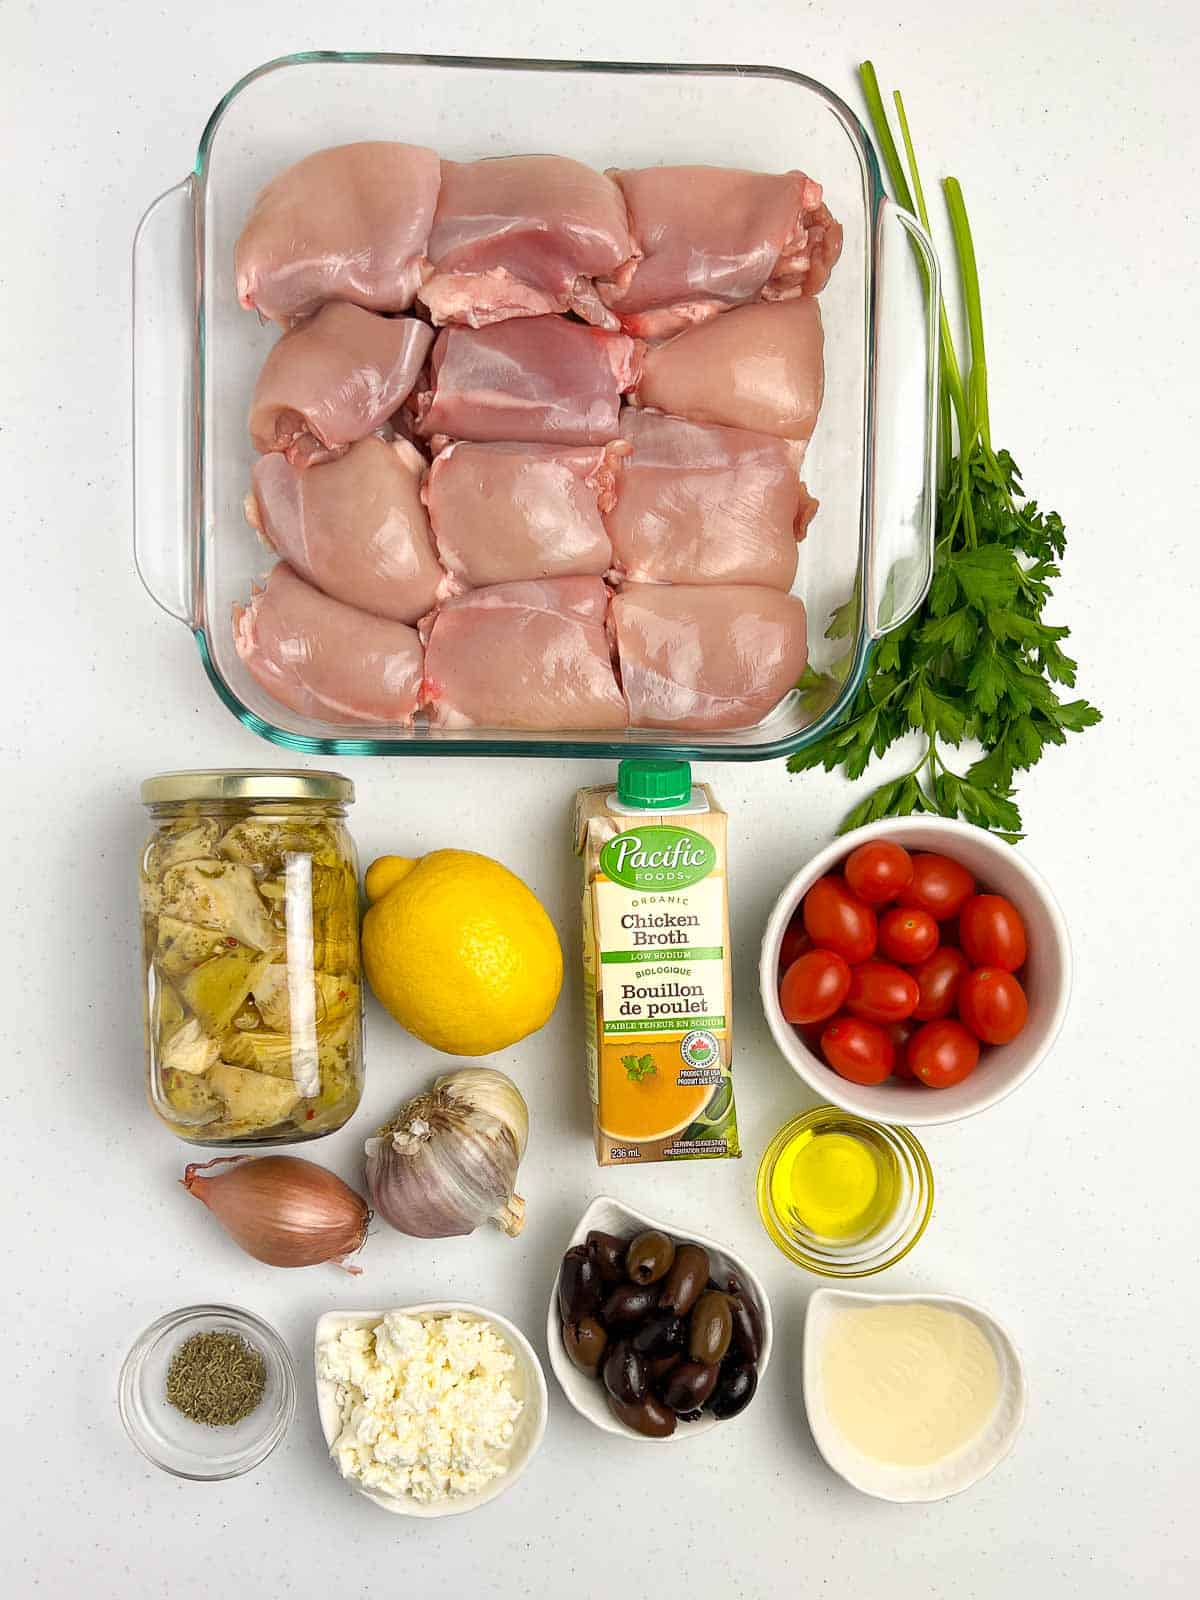 Ingredients for bake lemon artichoke chicken with olives and feta cheese.